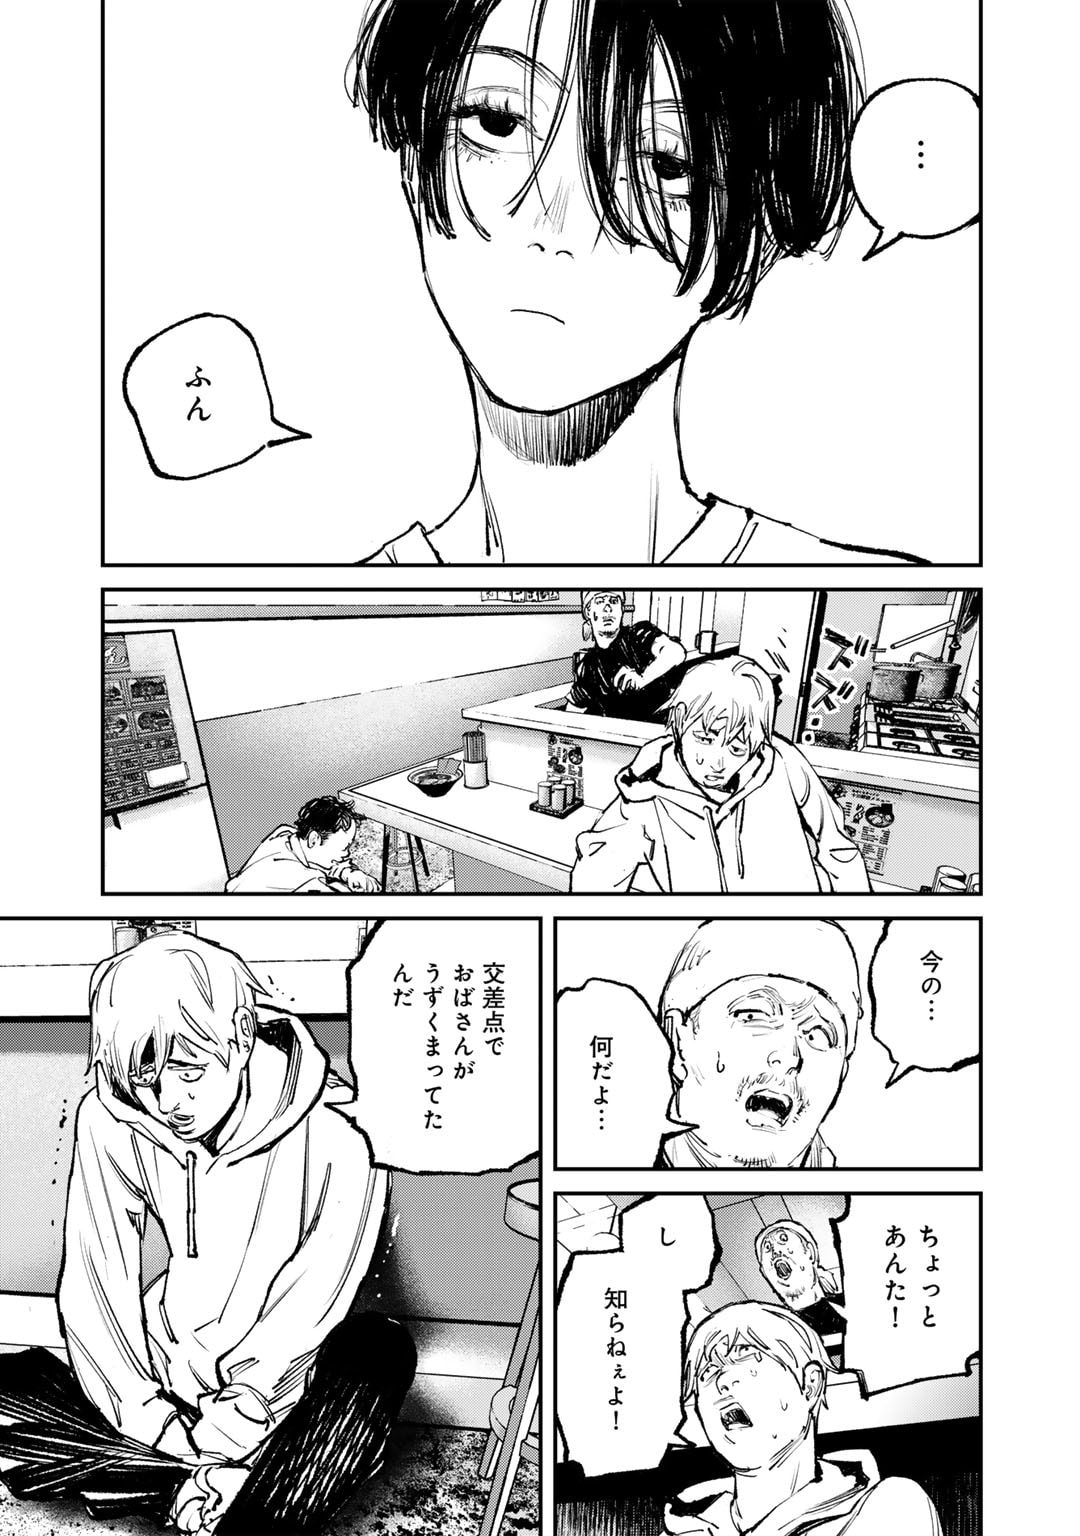 Kanata Is Into More Darker - Chapter 1 - Page 13